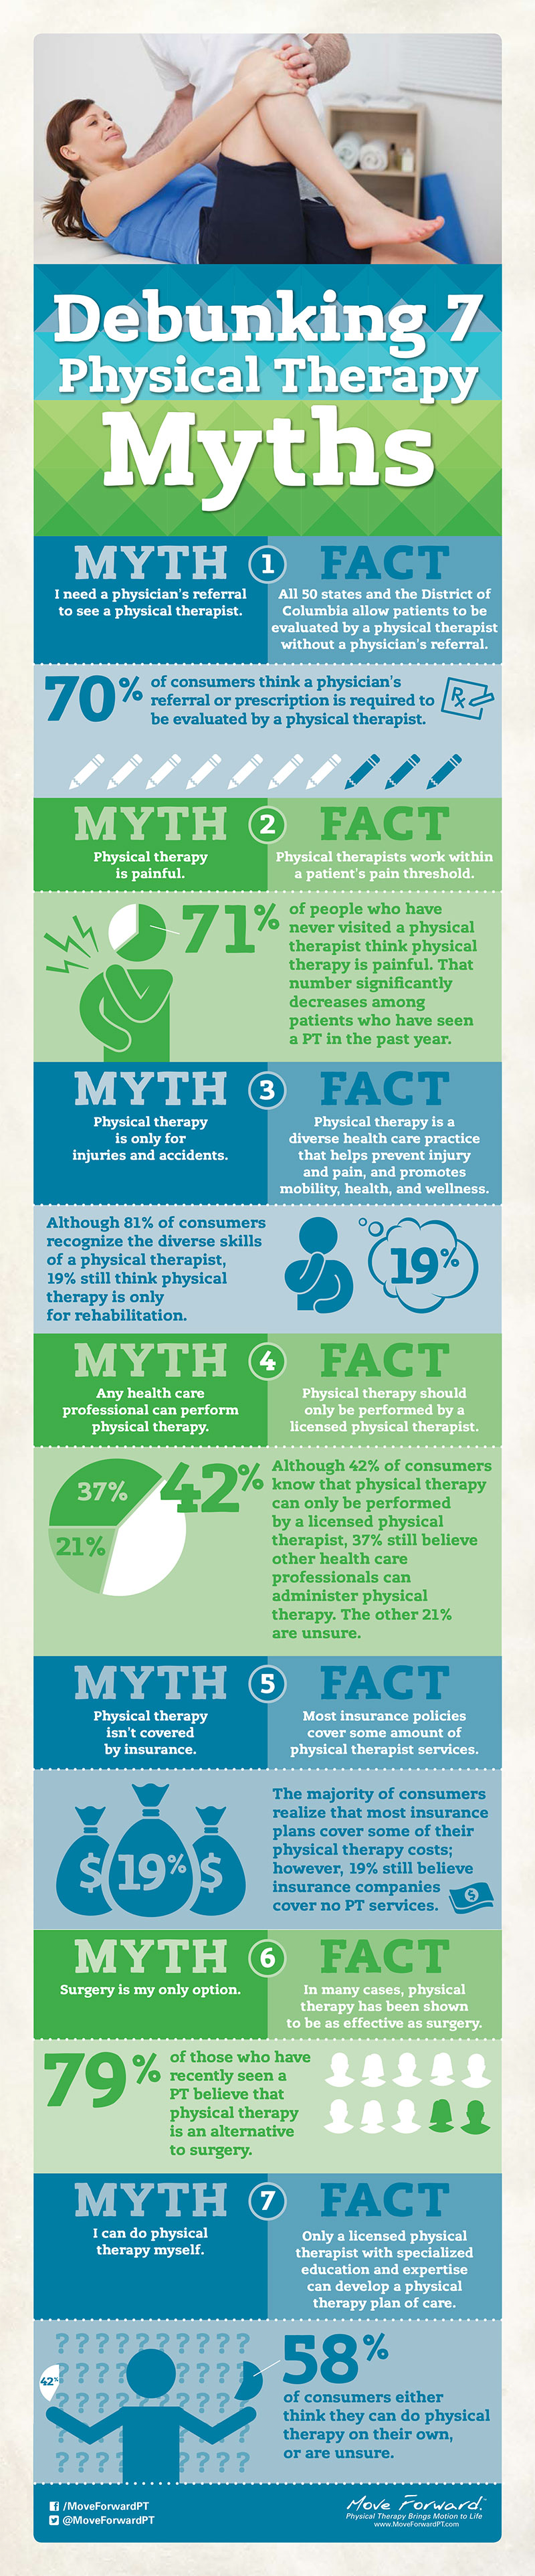 a graphic showing percentages of people who believe each of the above seven physical therapy misconceptions